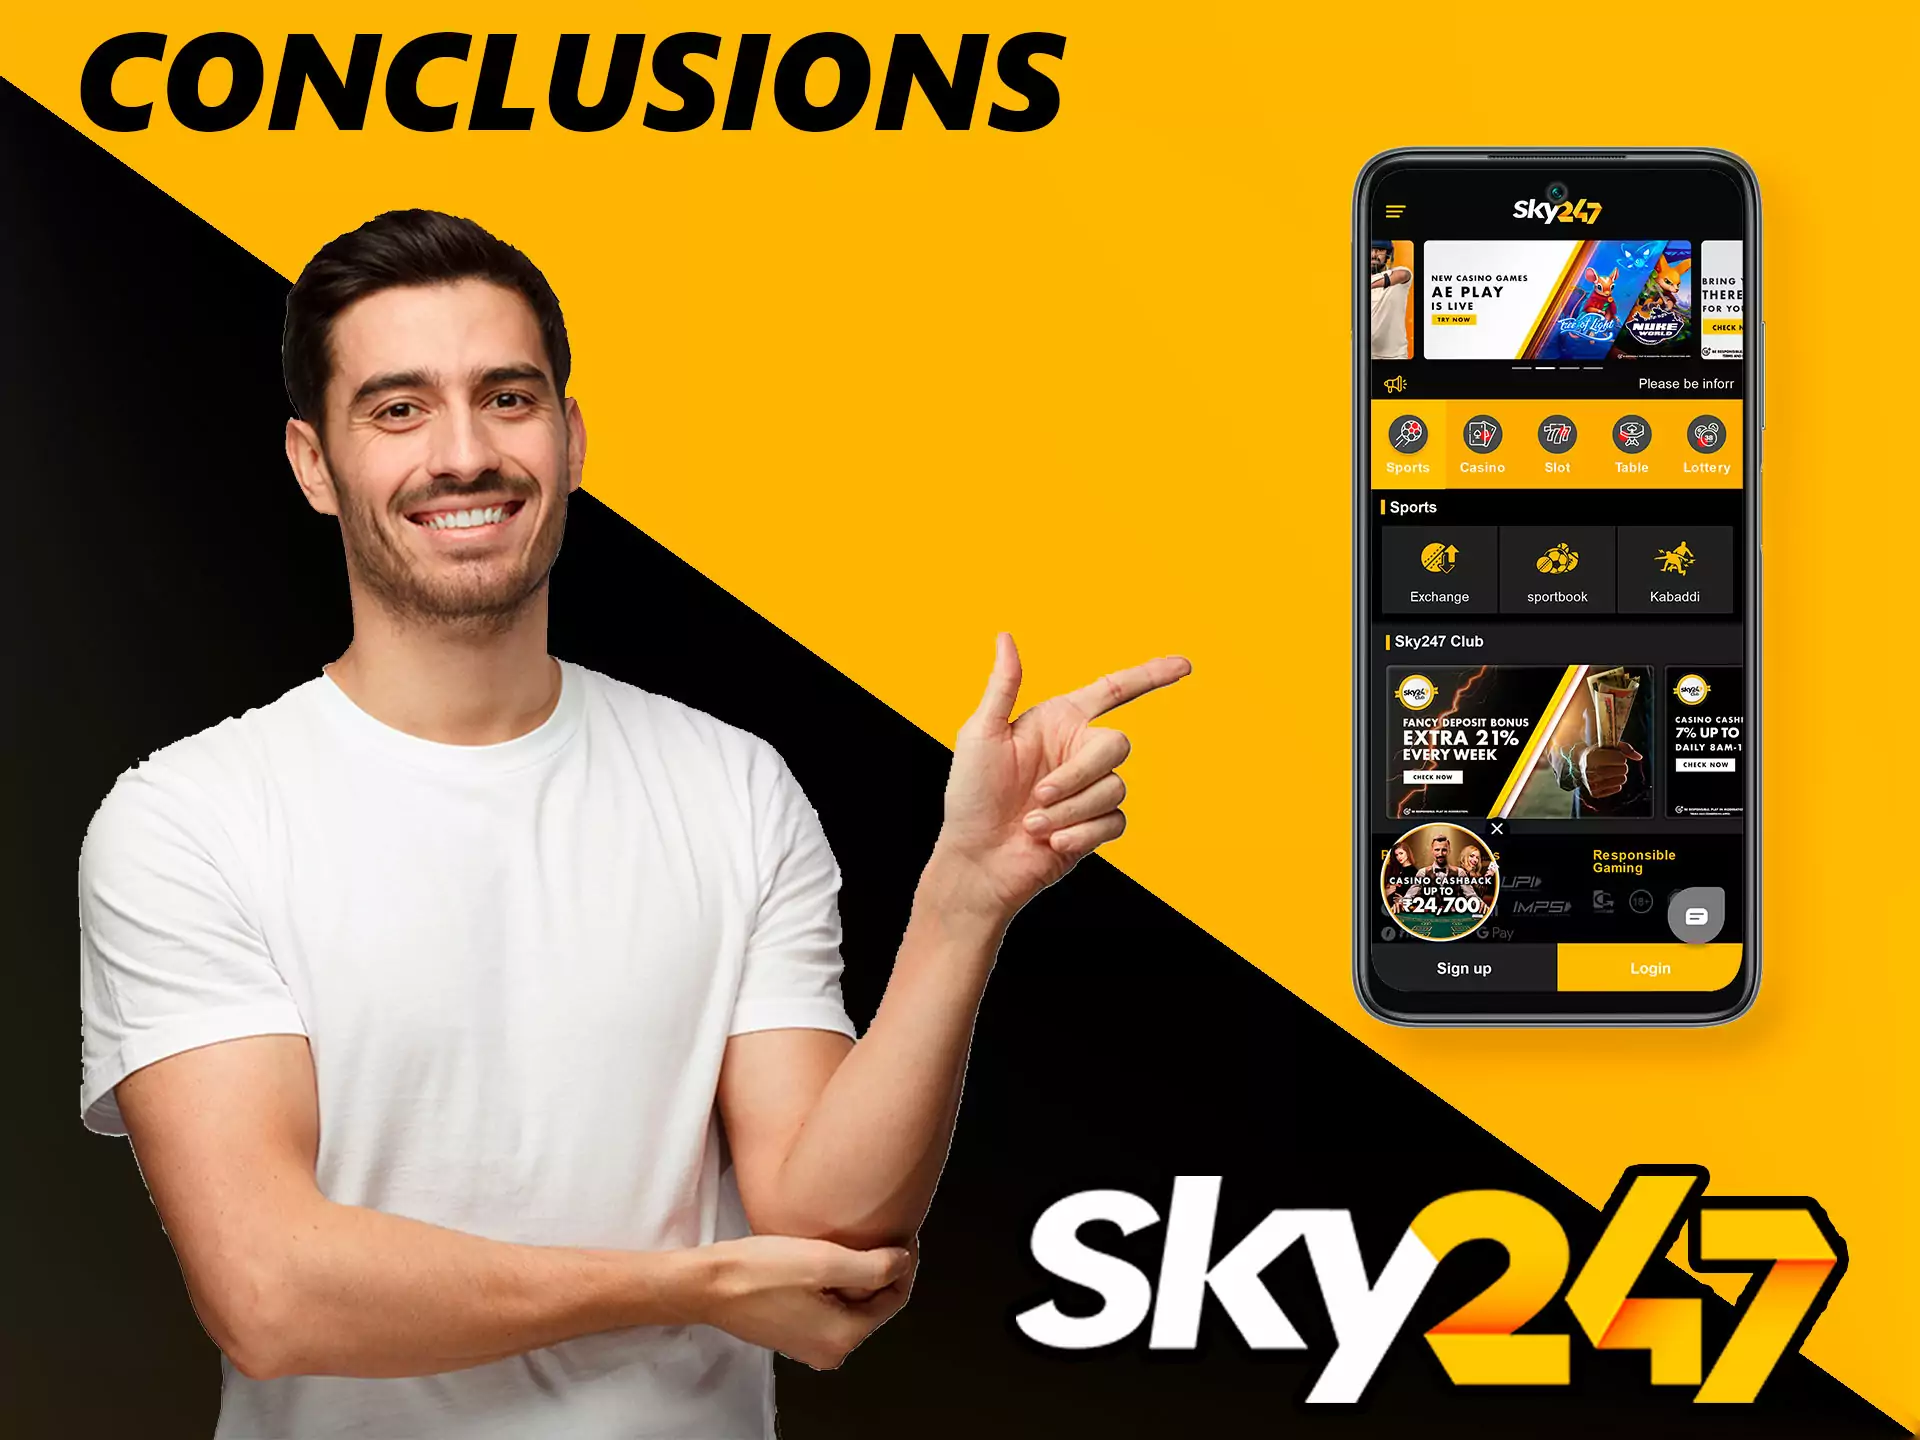 Sky247 is a successful app in the betting market, it is dedicated to digital games and has a high reputation, you will get: high quality product and excellent service.